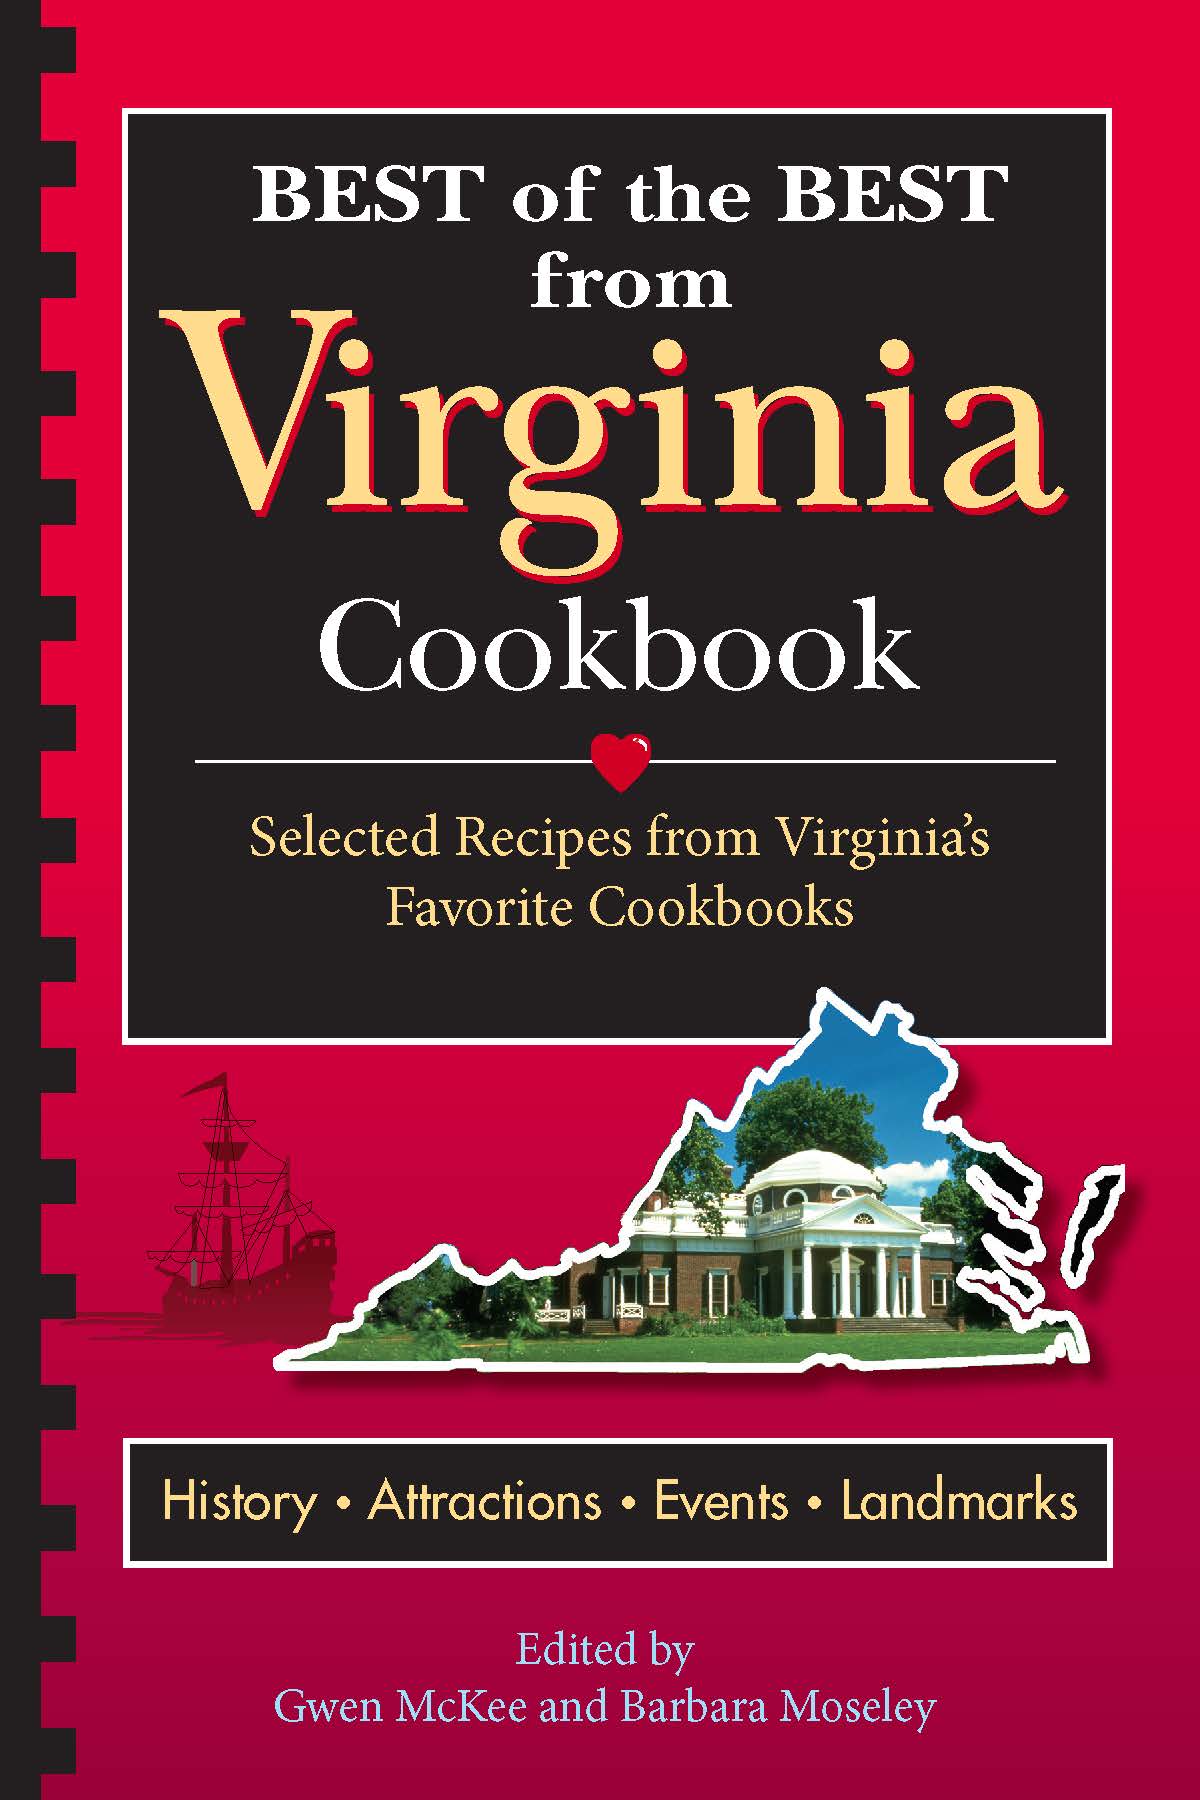 Best of the Best from Virginia Cookbook: Selected Recipes from Virginia's Favorite Cookbooks